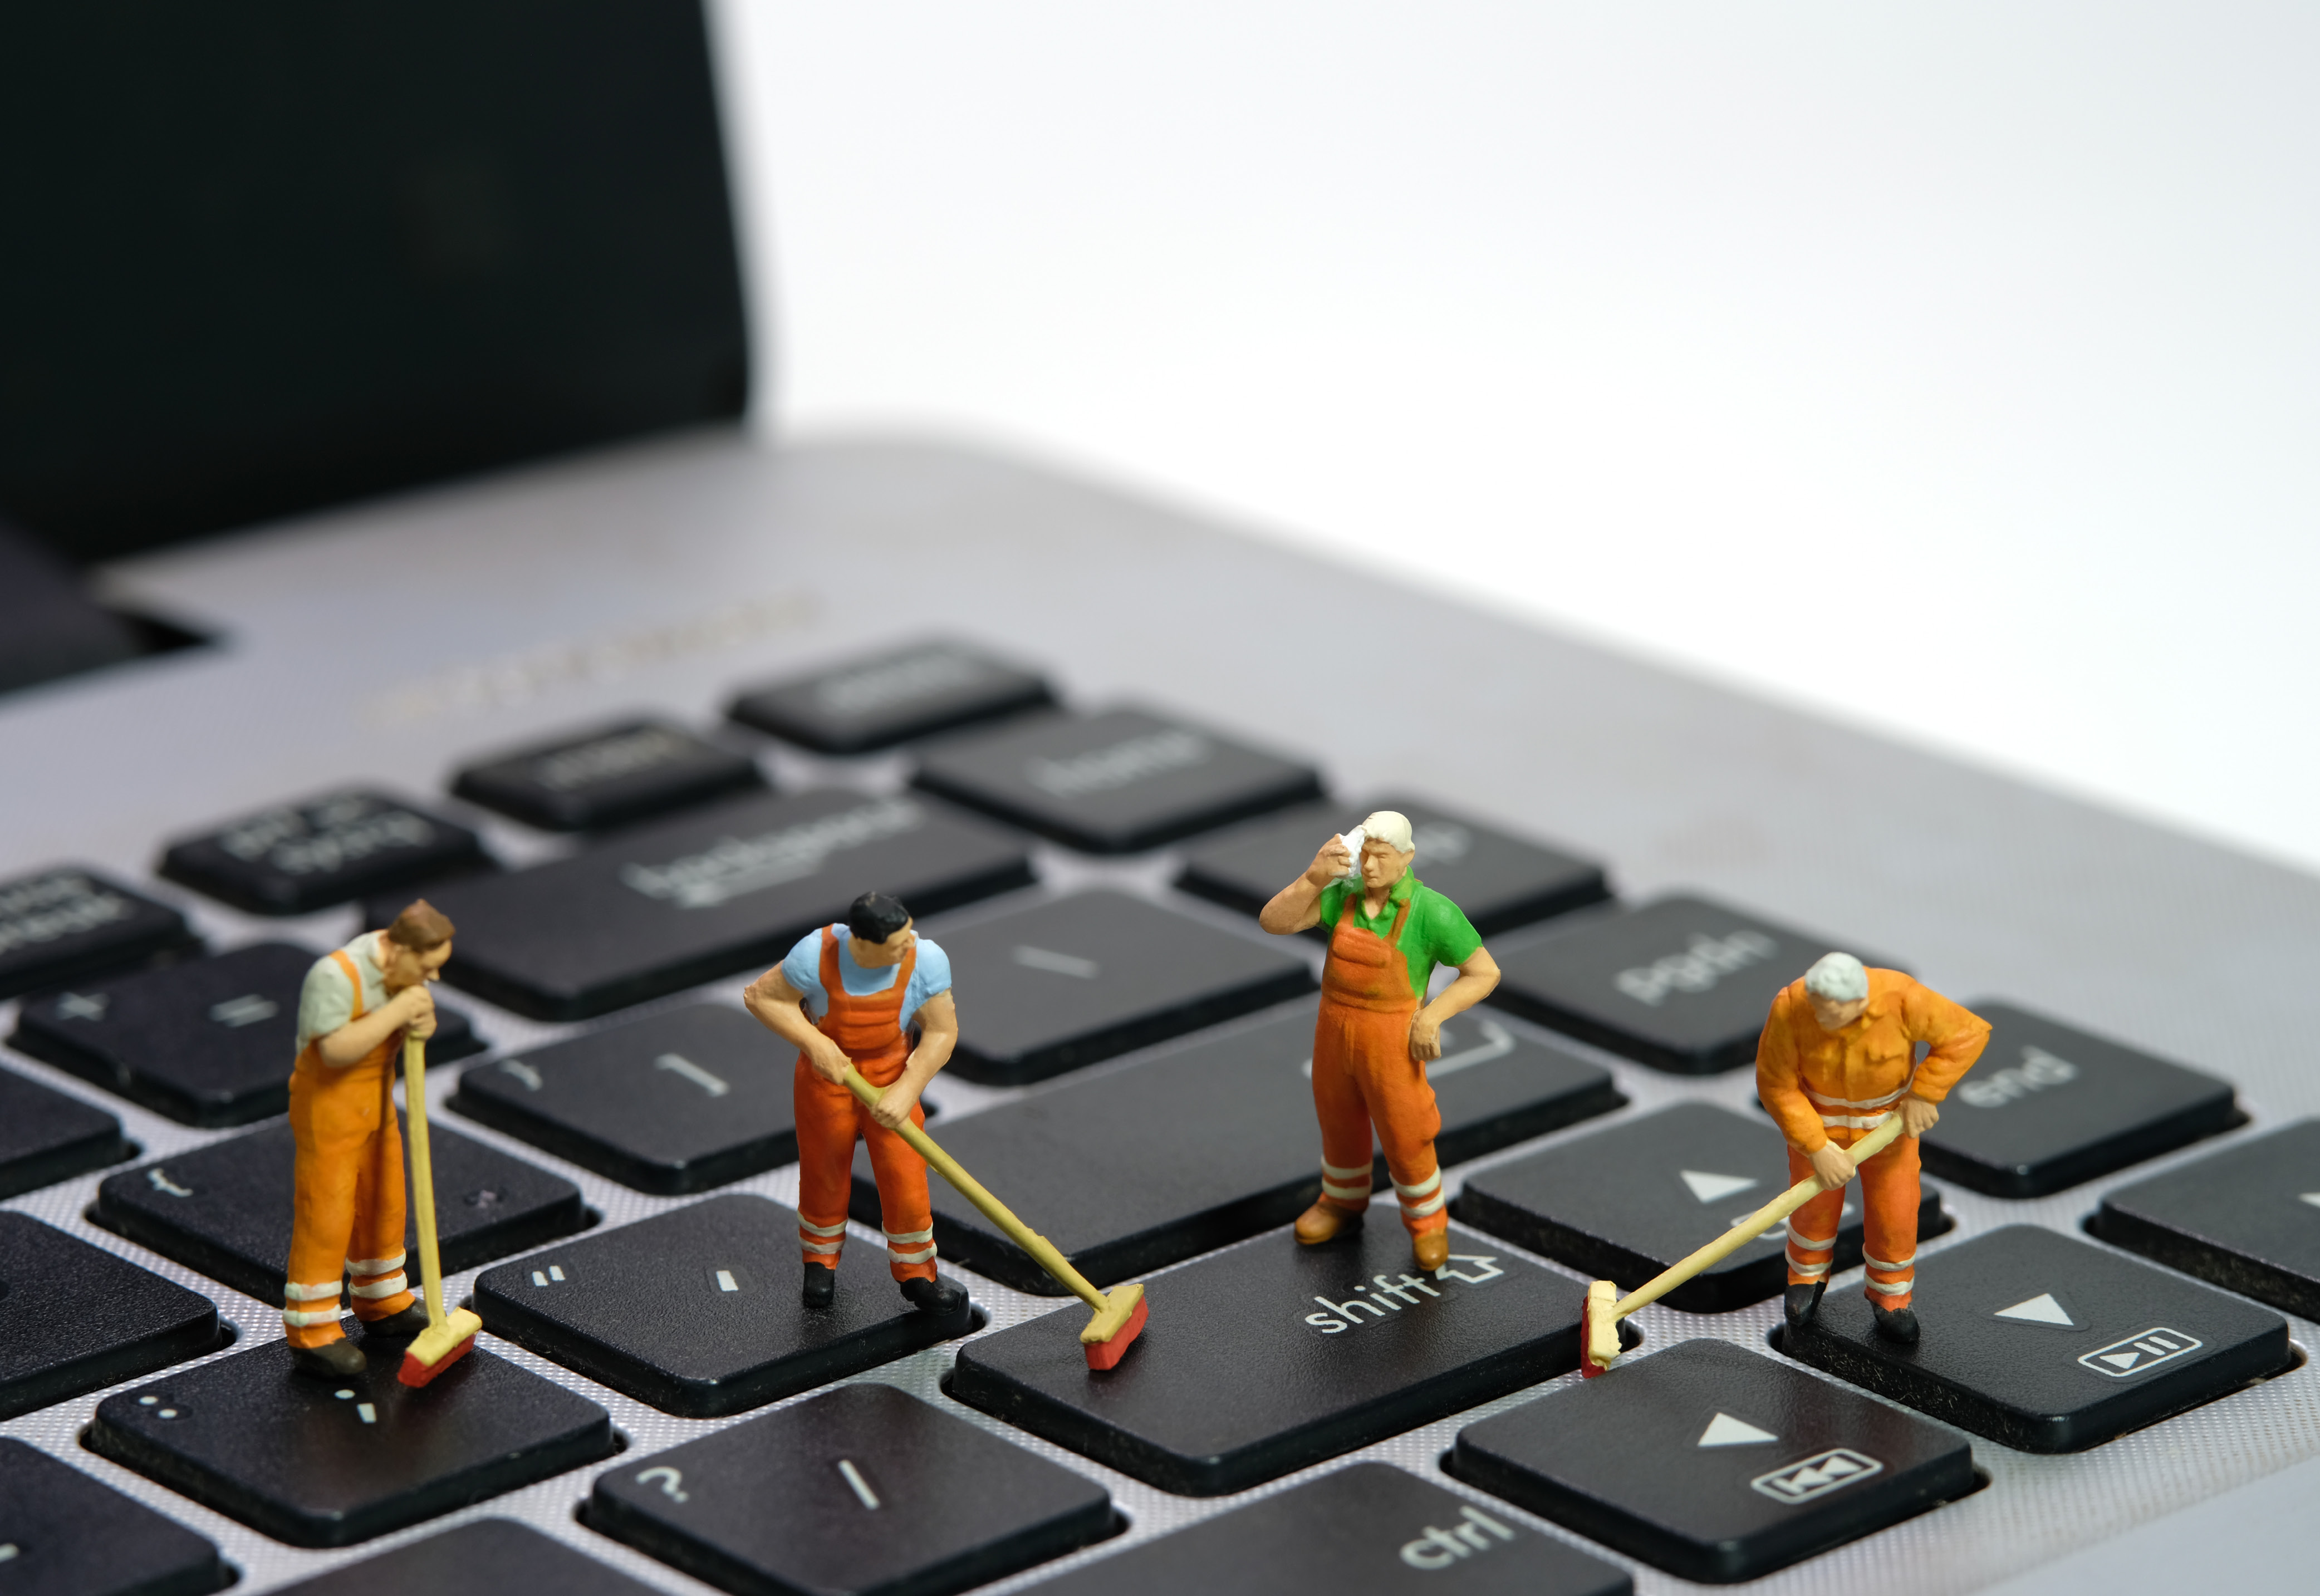 Figurines of people standing on a laptop keyboard and cleaning